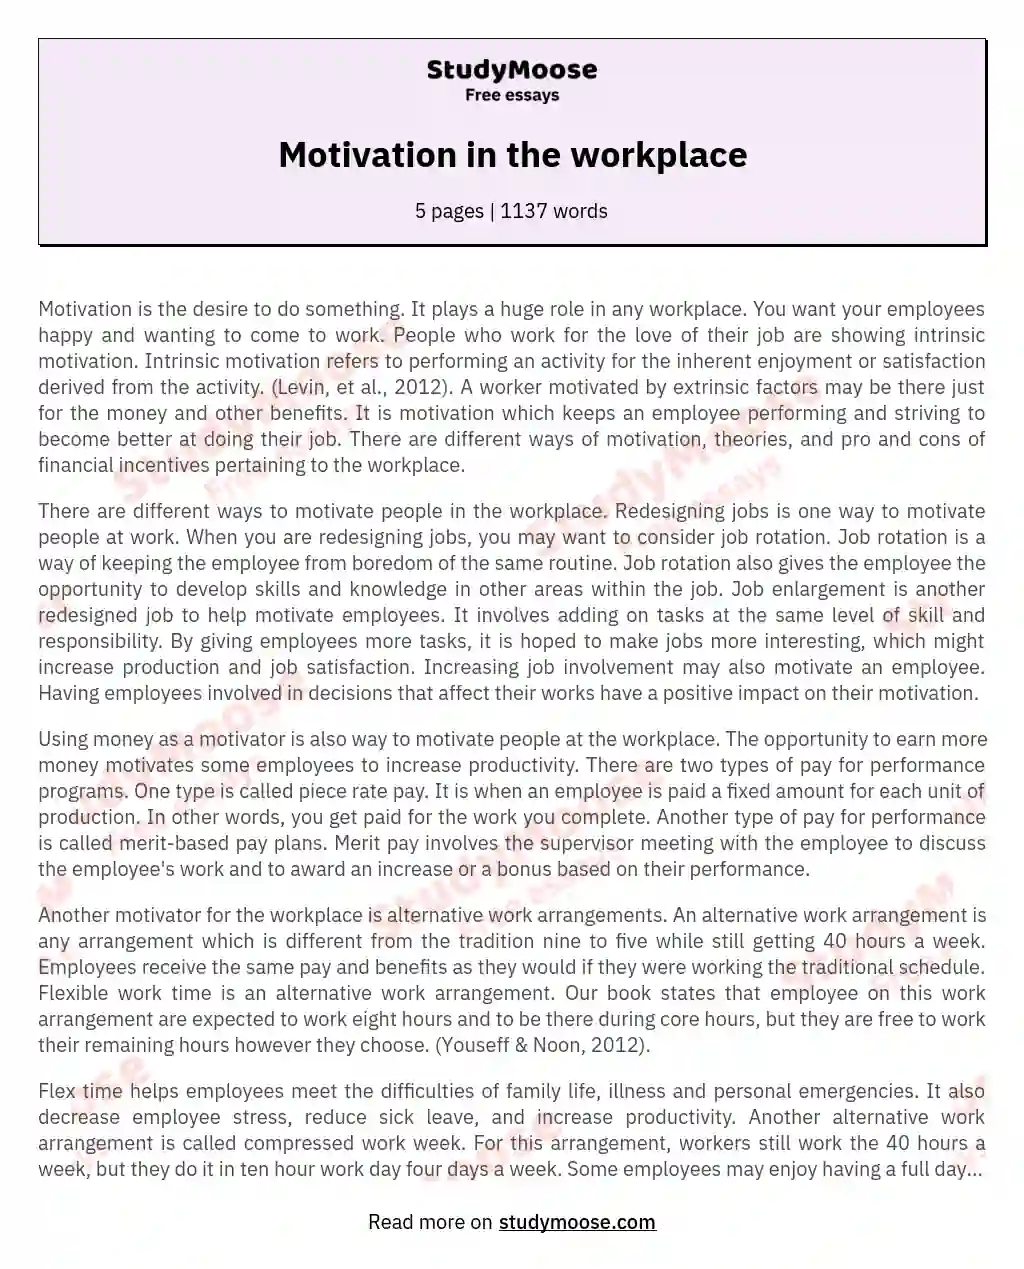 Motivation in the workplace essay